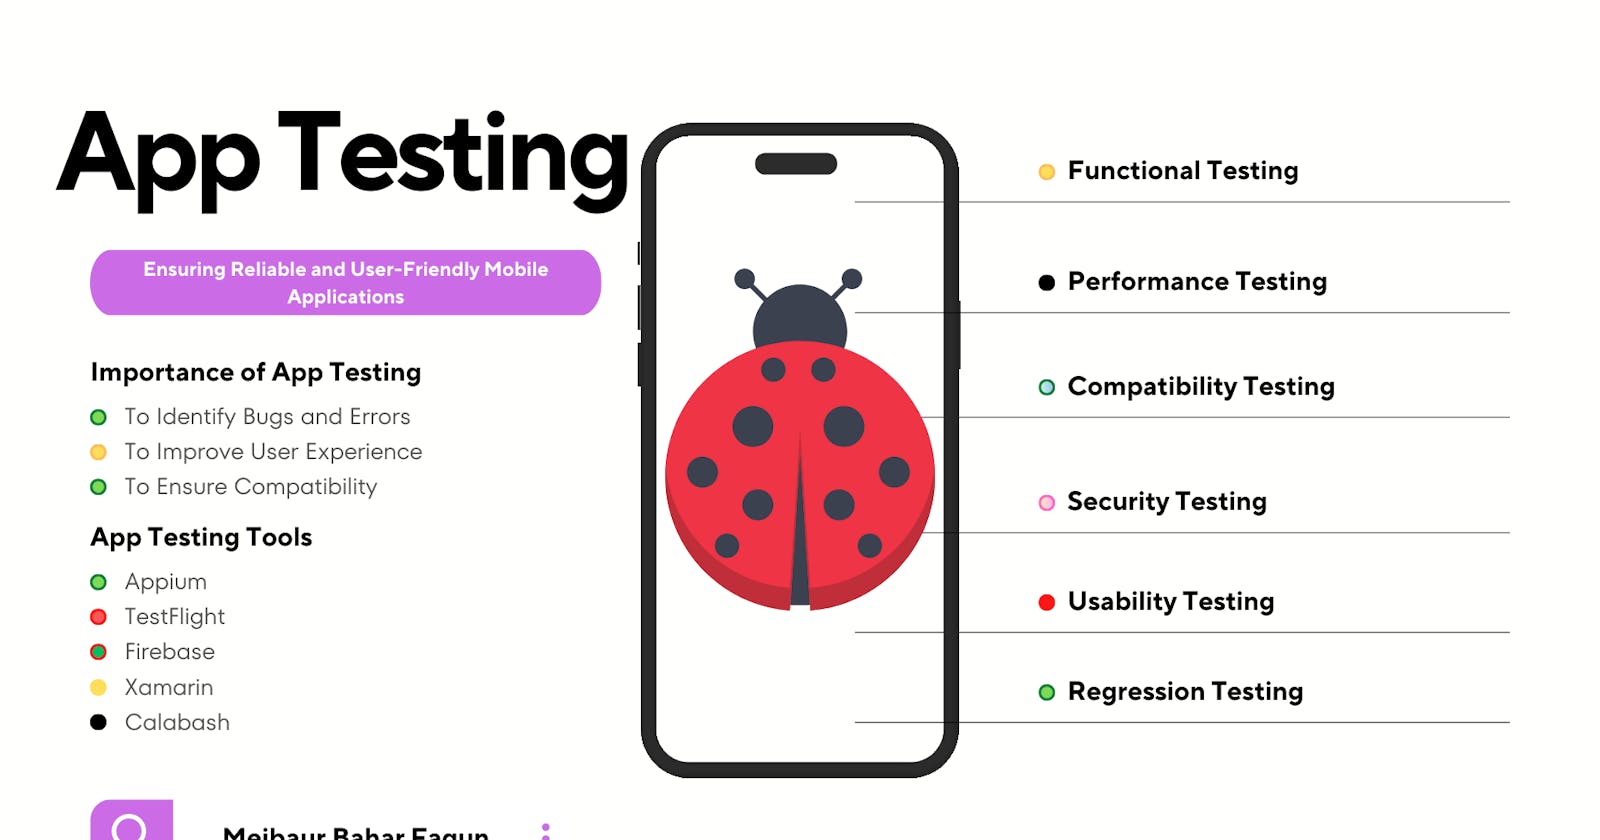 App Testing: Ensuring Reliable and User-Friendly Mobile Applications